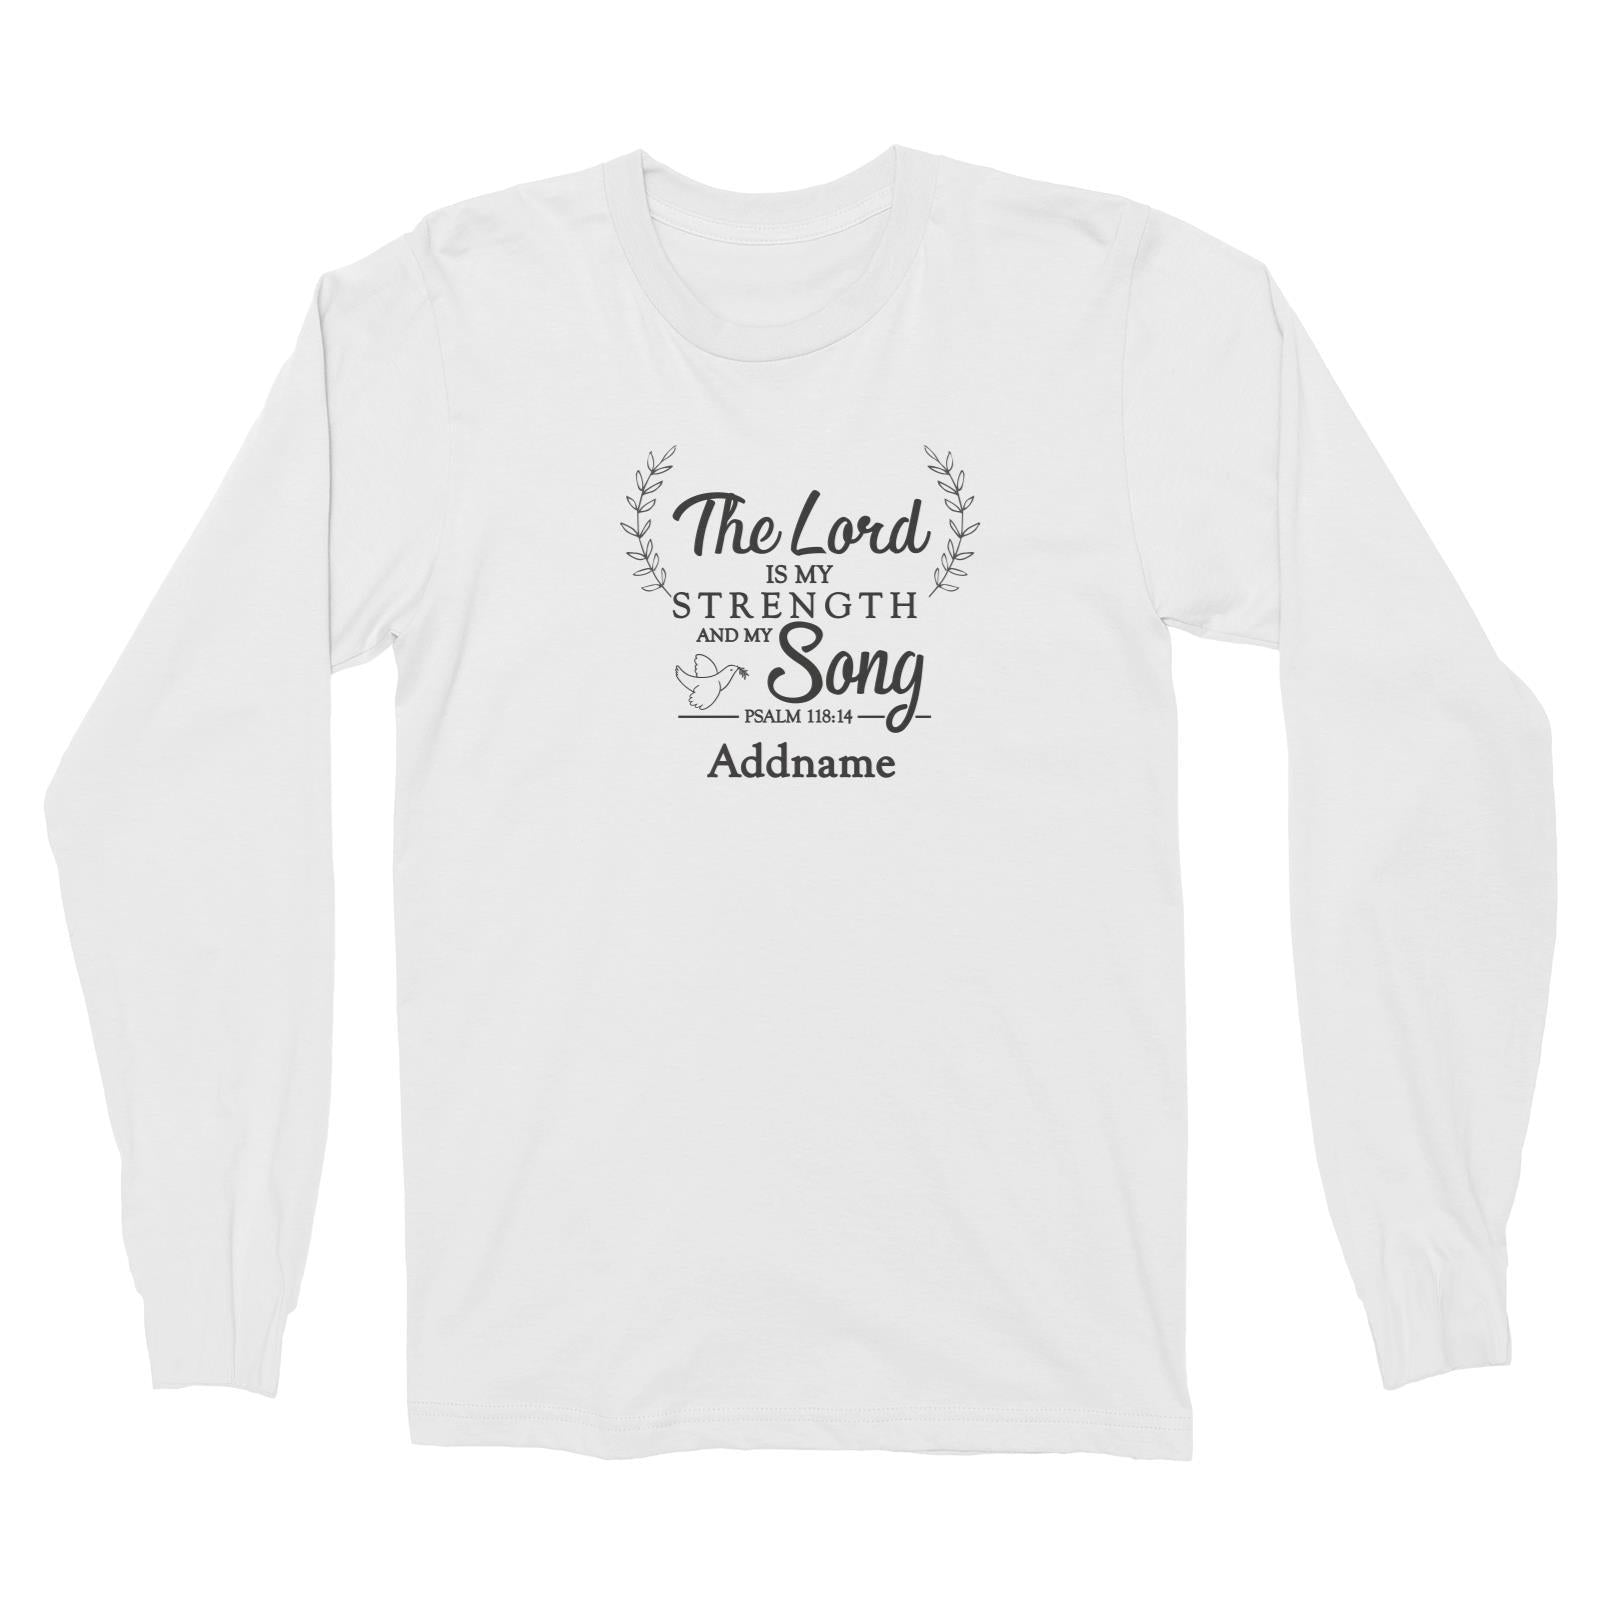 Christian Series The Lord Is My Strength Song Psalm 118.14 Addname Long Sleeve Unisex T-Shirt